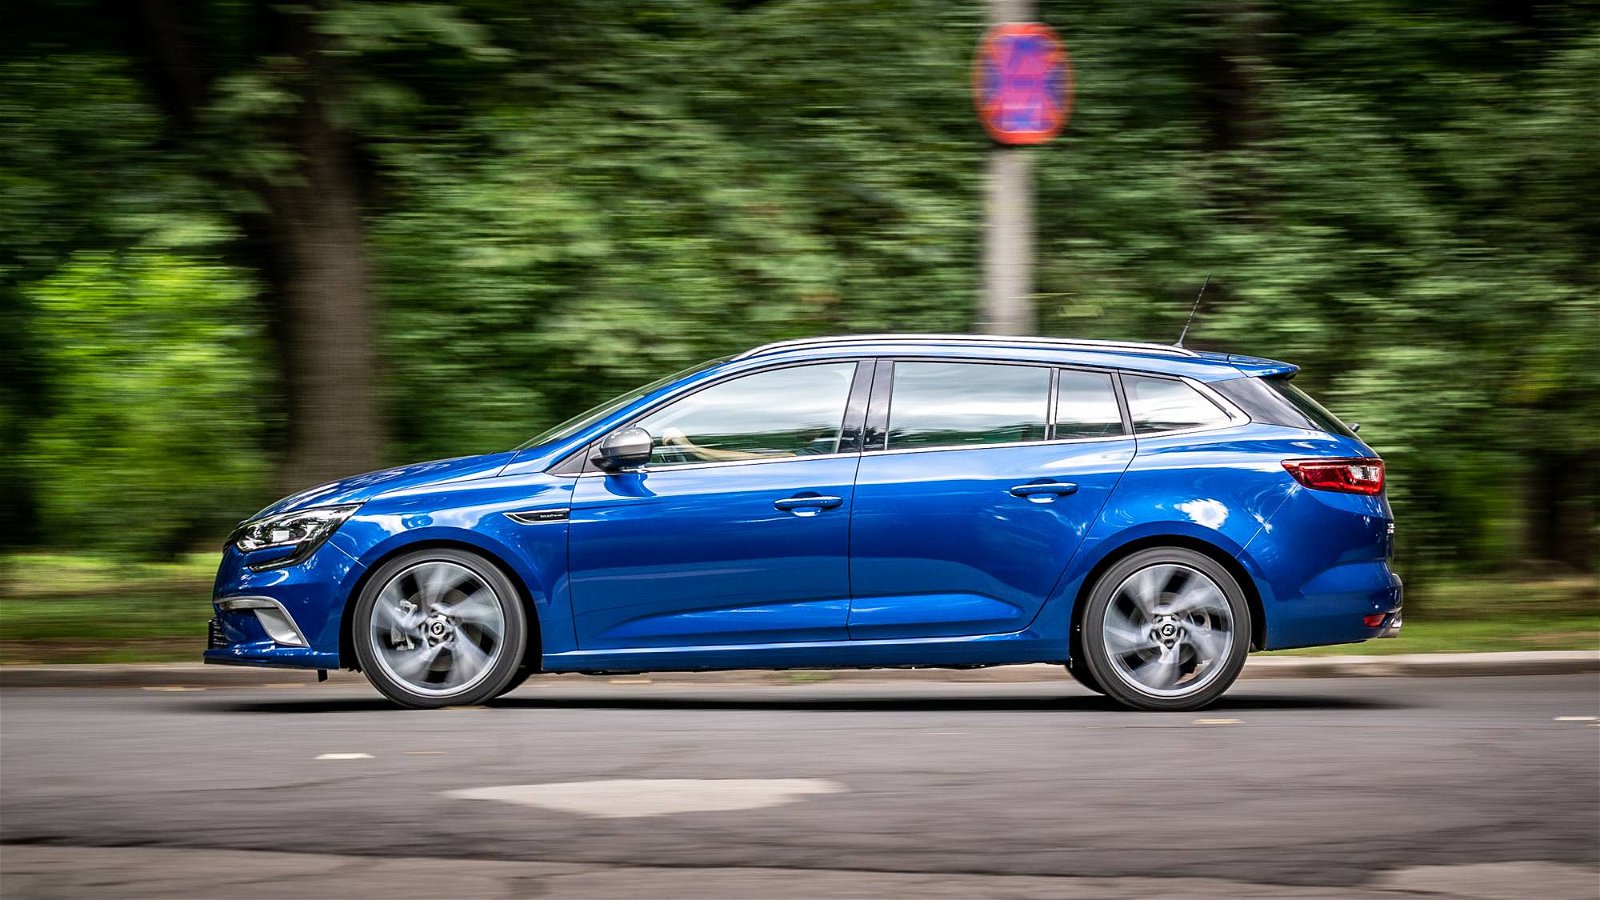 2018 Renault Megane GT review: the people's quickish wagon | DriveMag Cars